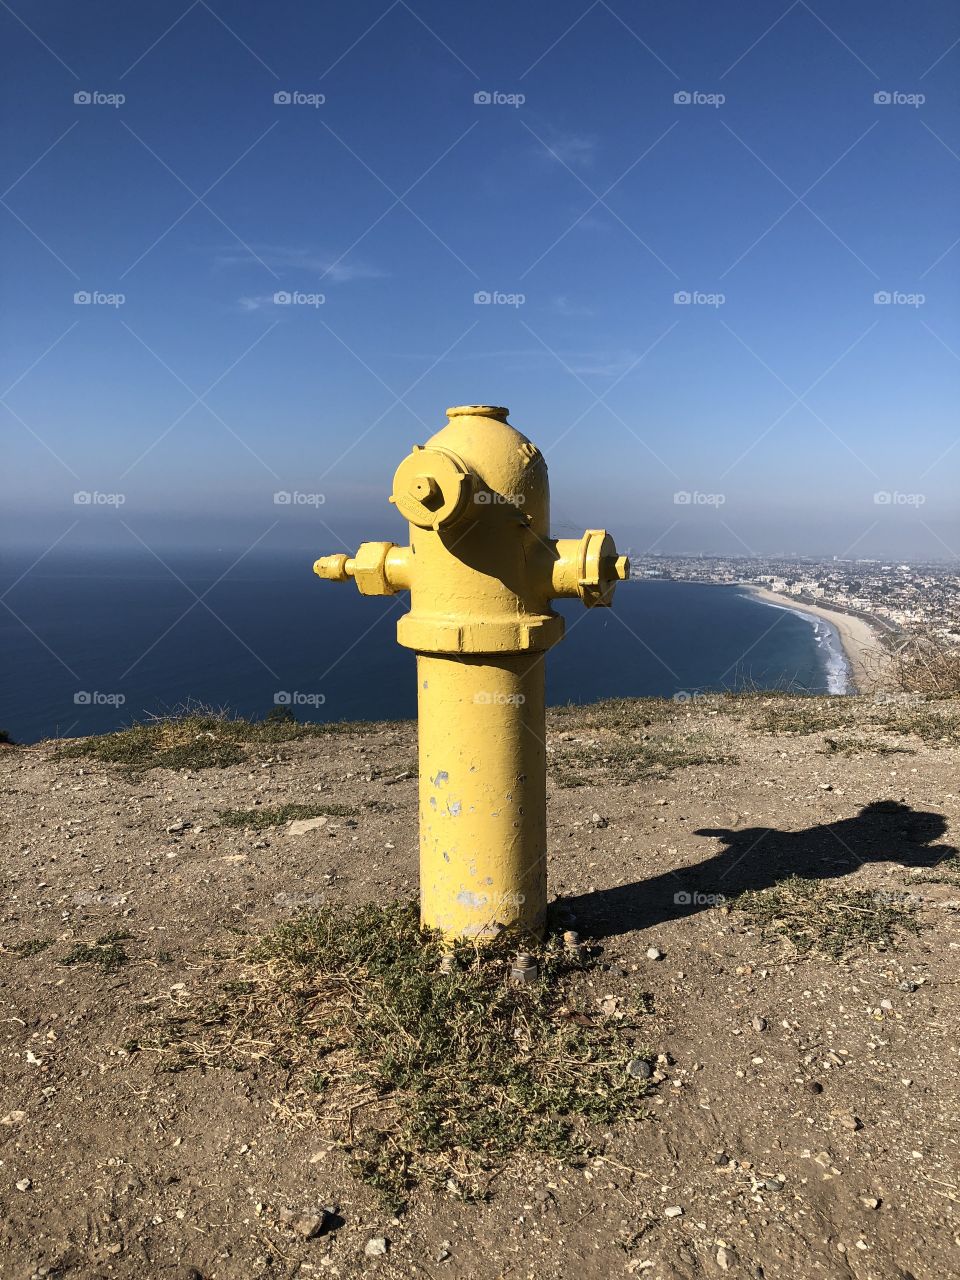 Yellow fire hydrant overlooking beach city 